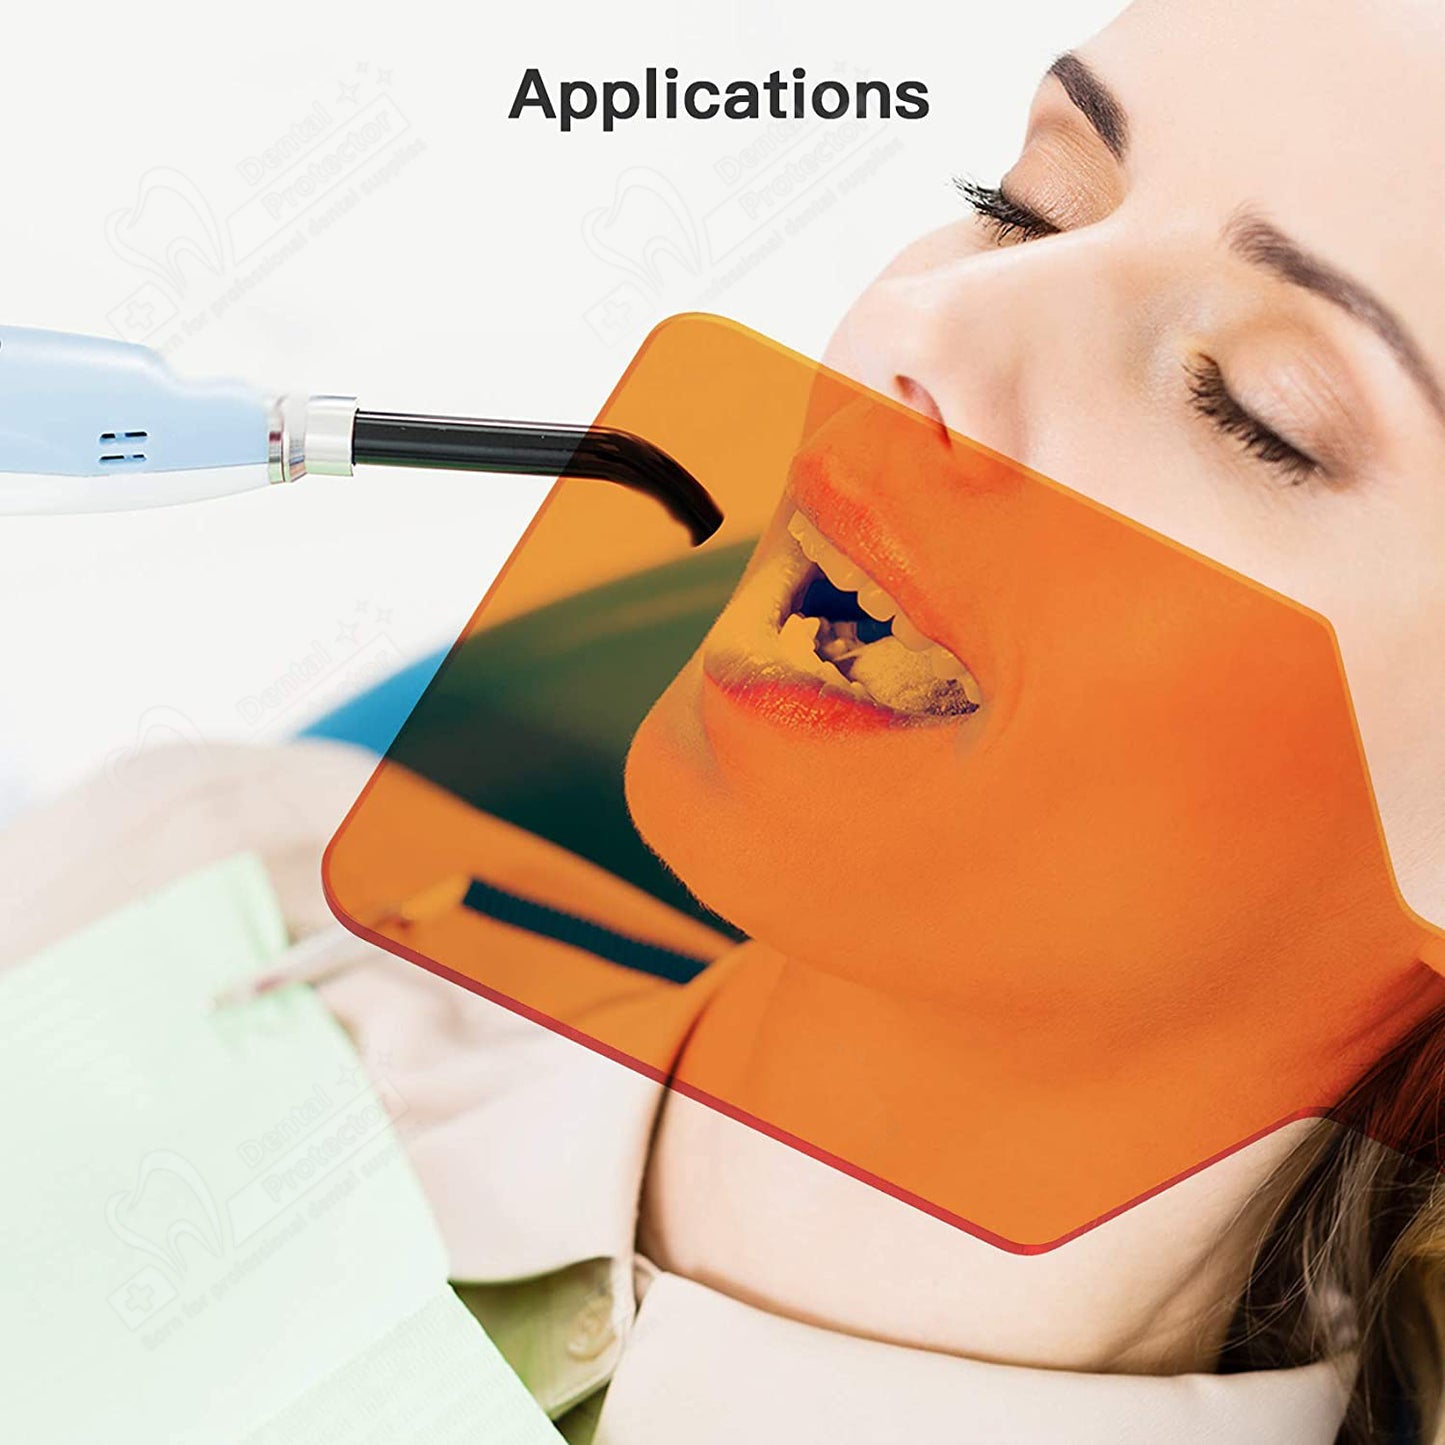 Protector Dental Sheild Plate Shade Board Eye Protector for Curing Light, Curing Lamp Shield Visor for Dentist, Helper and Patient - Handheld & Flexible - Easy to Use